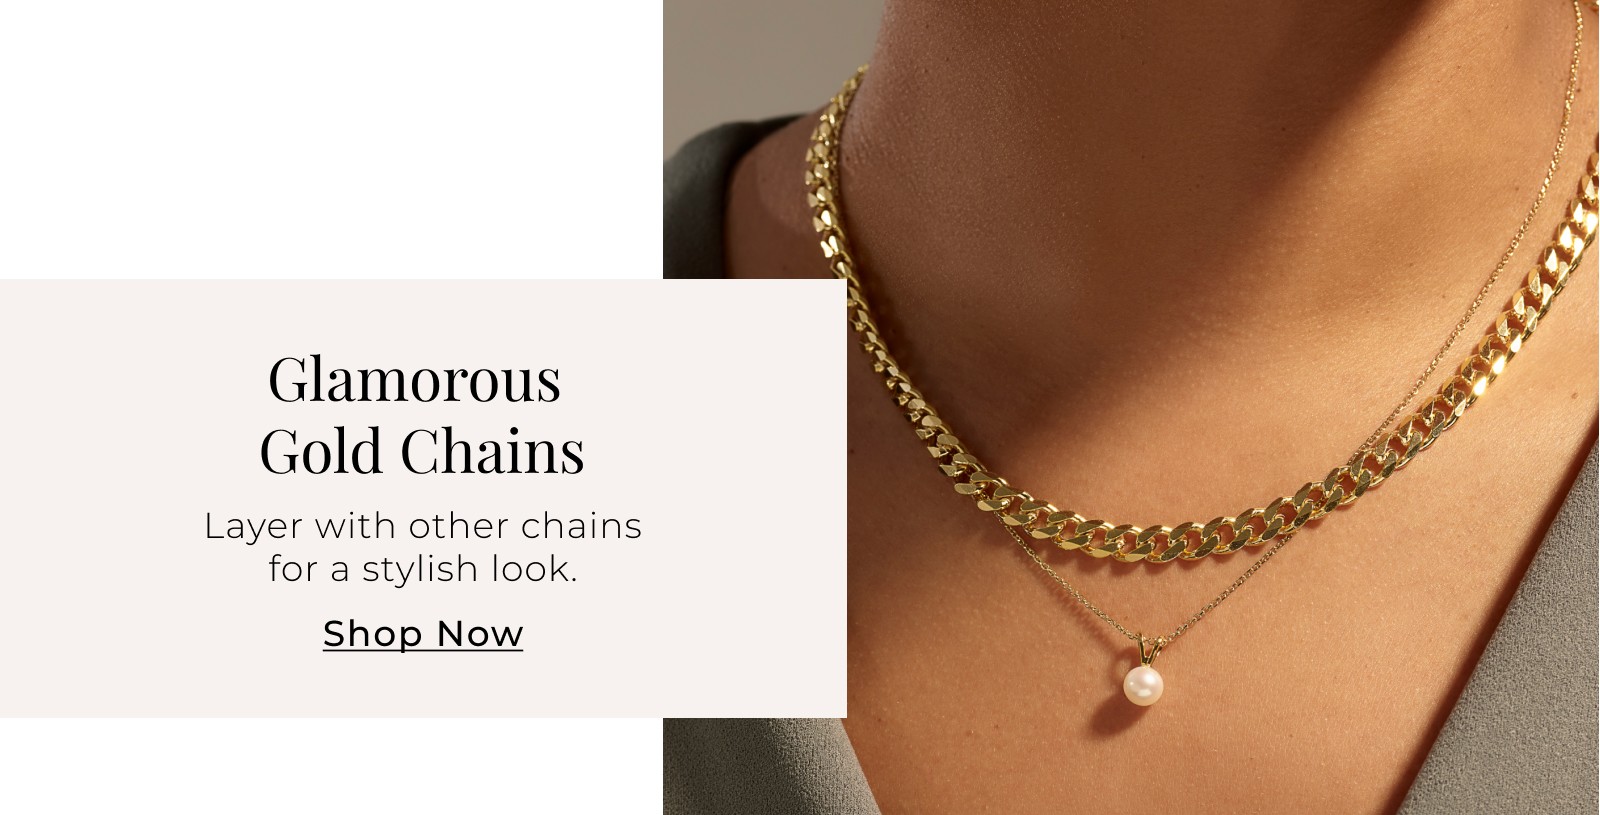 Glamorous Gold Chains - Layer with other chains for a stylish look. Shop Now >